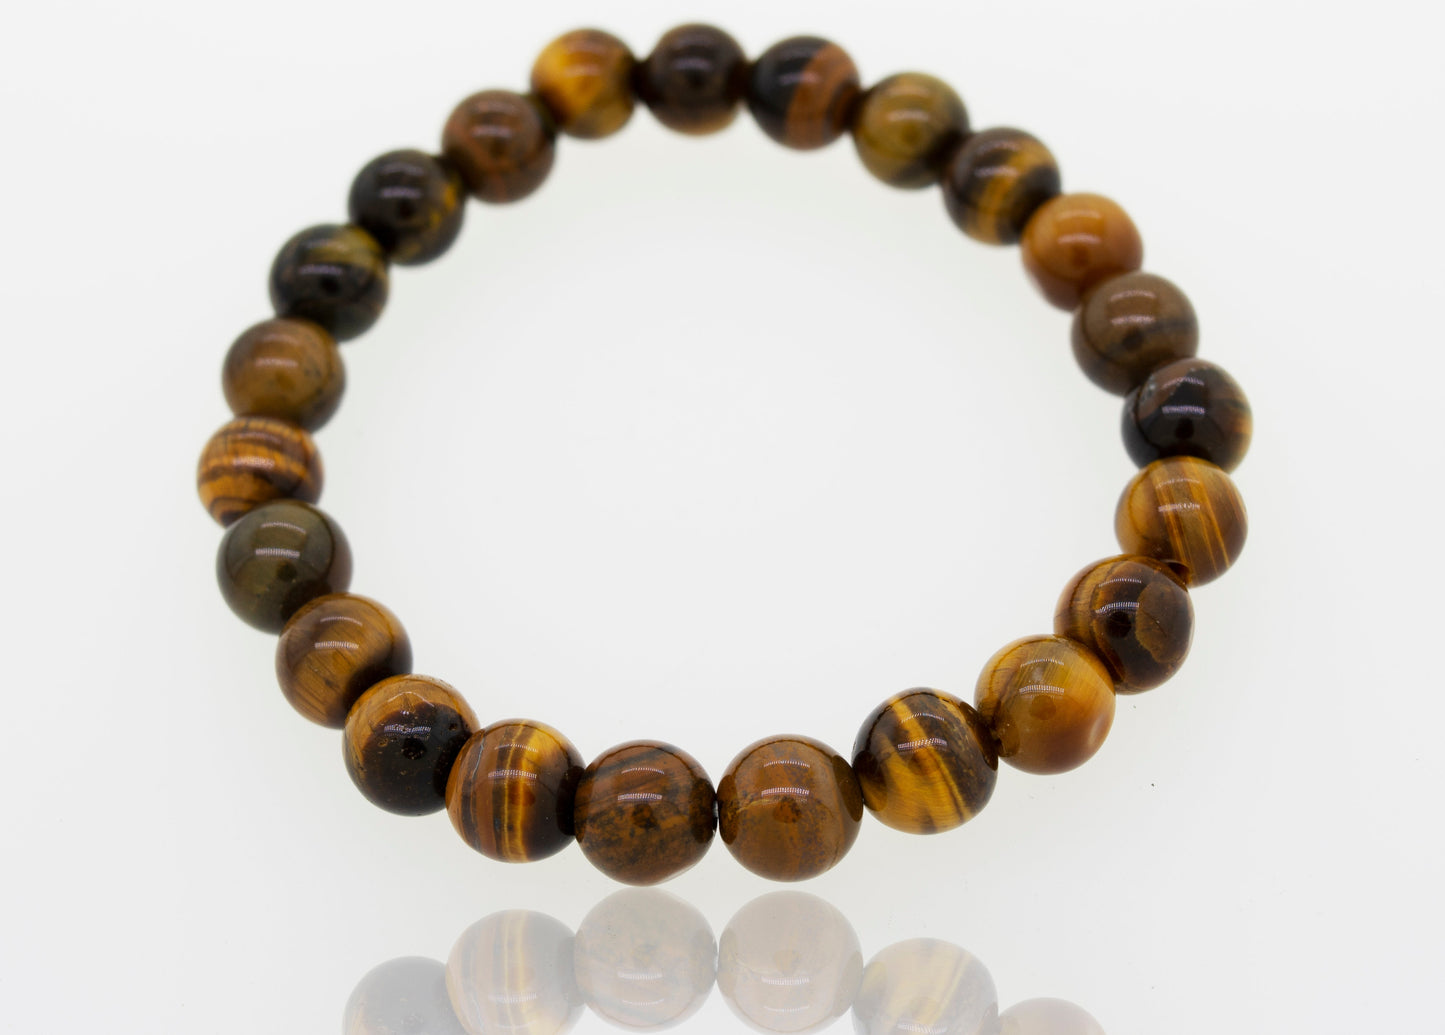 
                  
                    4mm Beaded Stone Bracelets made of polished tiger's eye stones, described as a healing stone bracelet, displayed on a reflective white surface.
                  
                